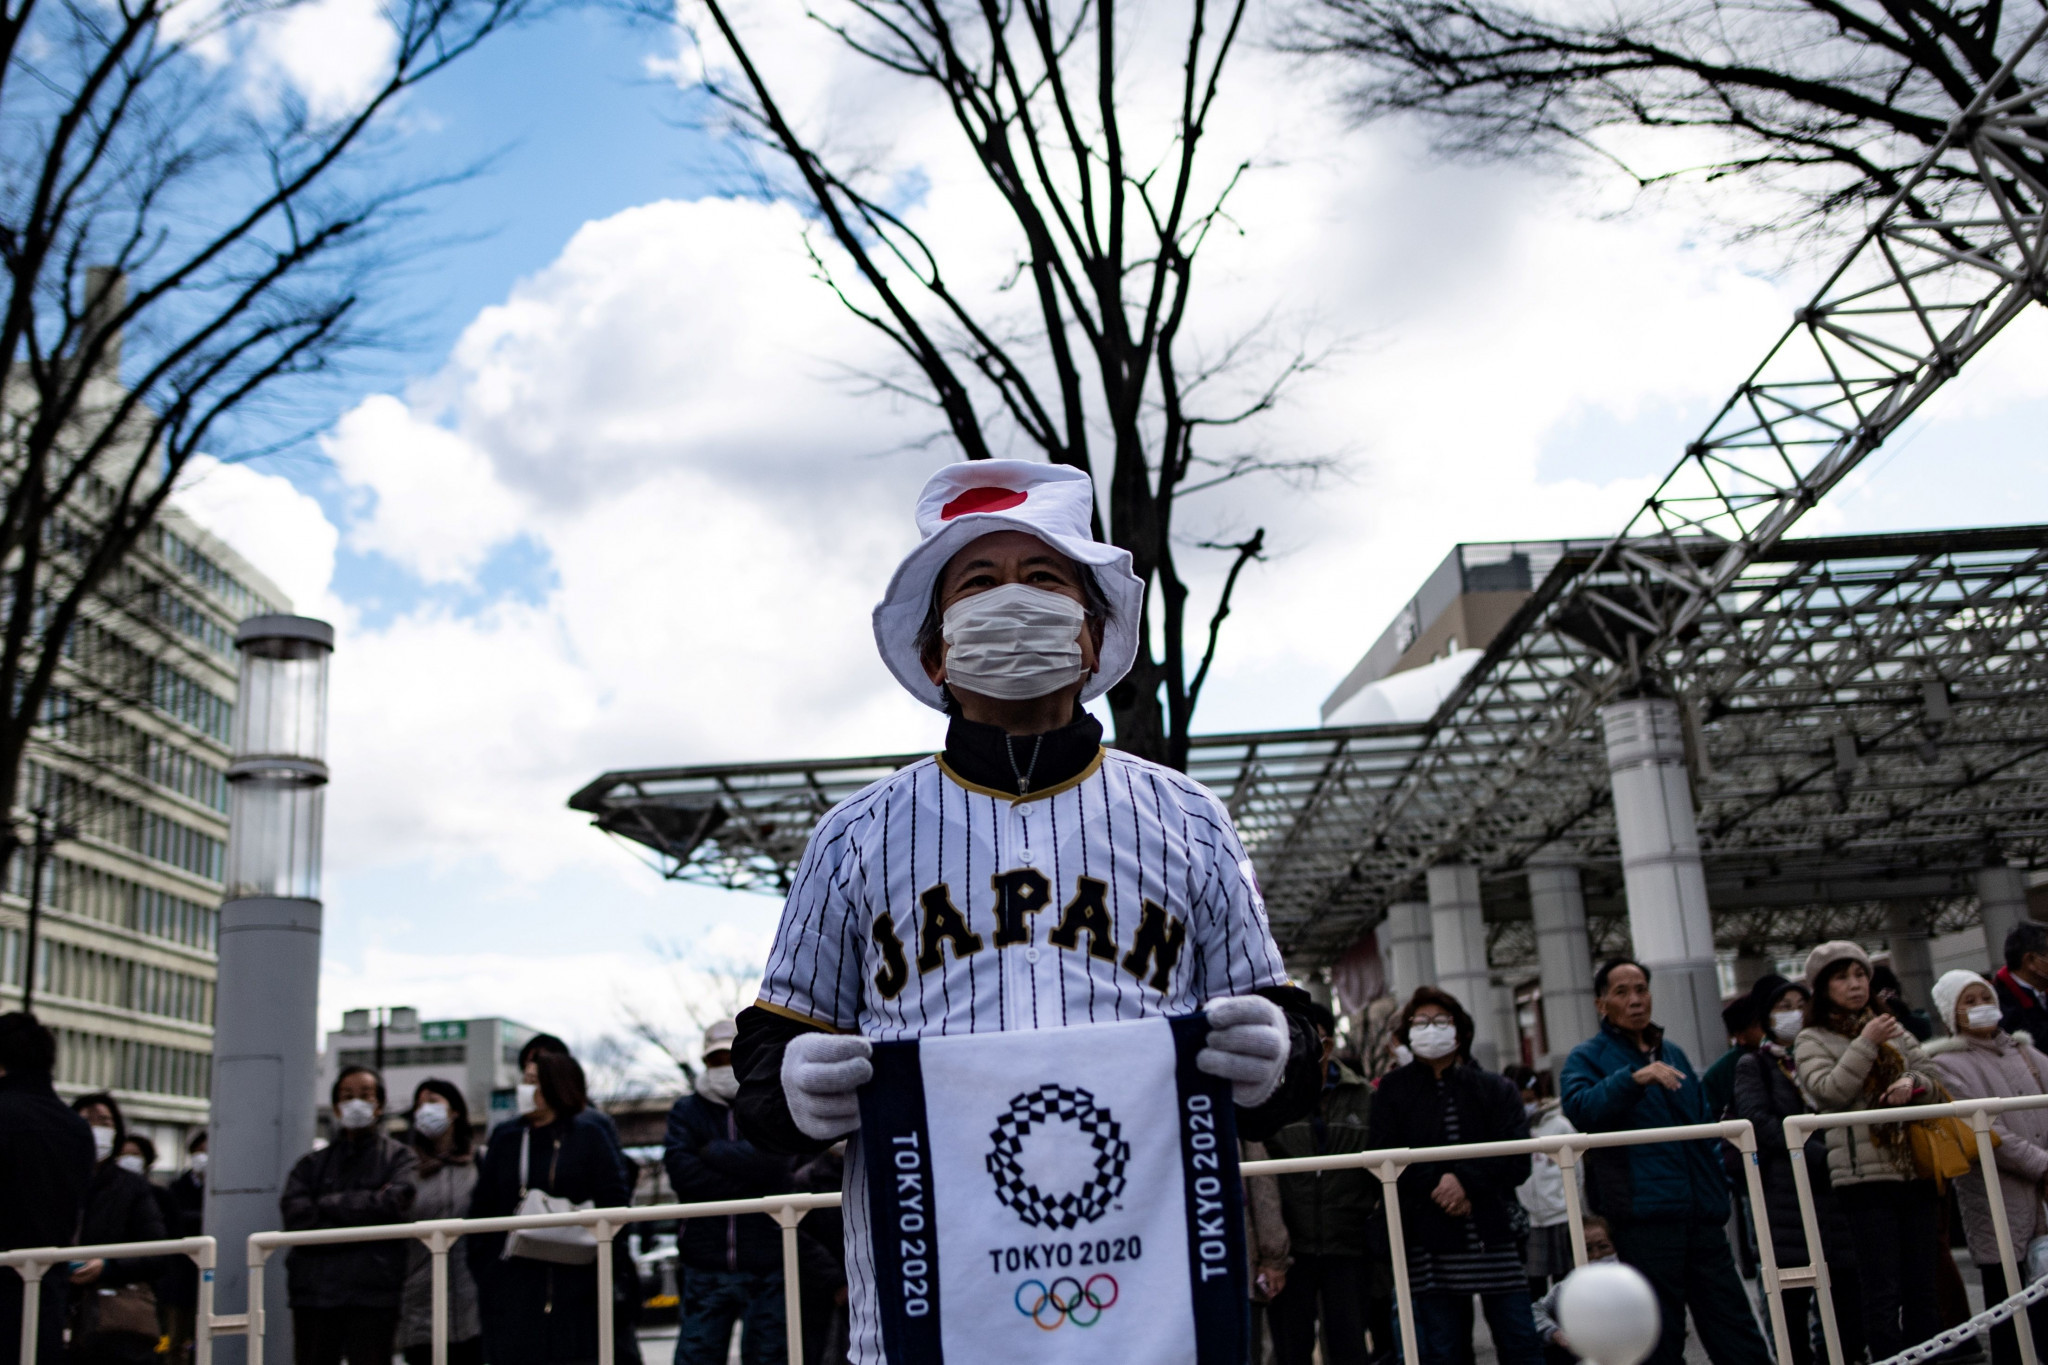 Tokyo 2020 hope fans will be able to attend the Olympic and Paralympic Games next year ©Getty Images